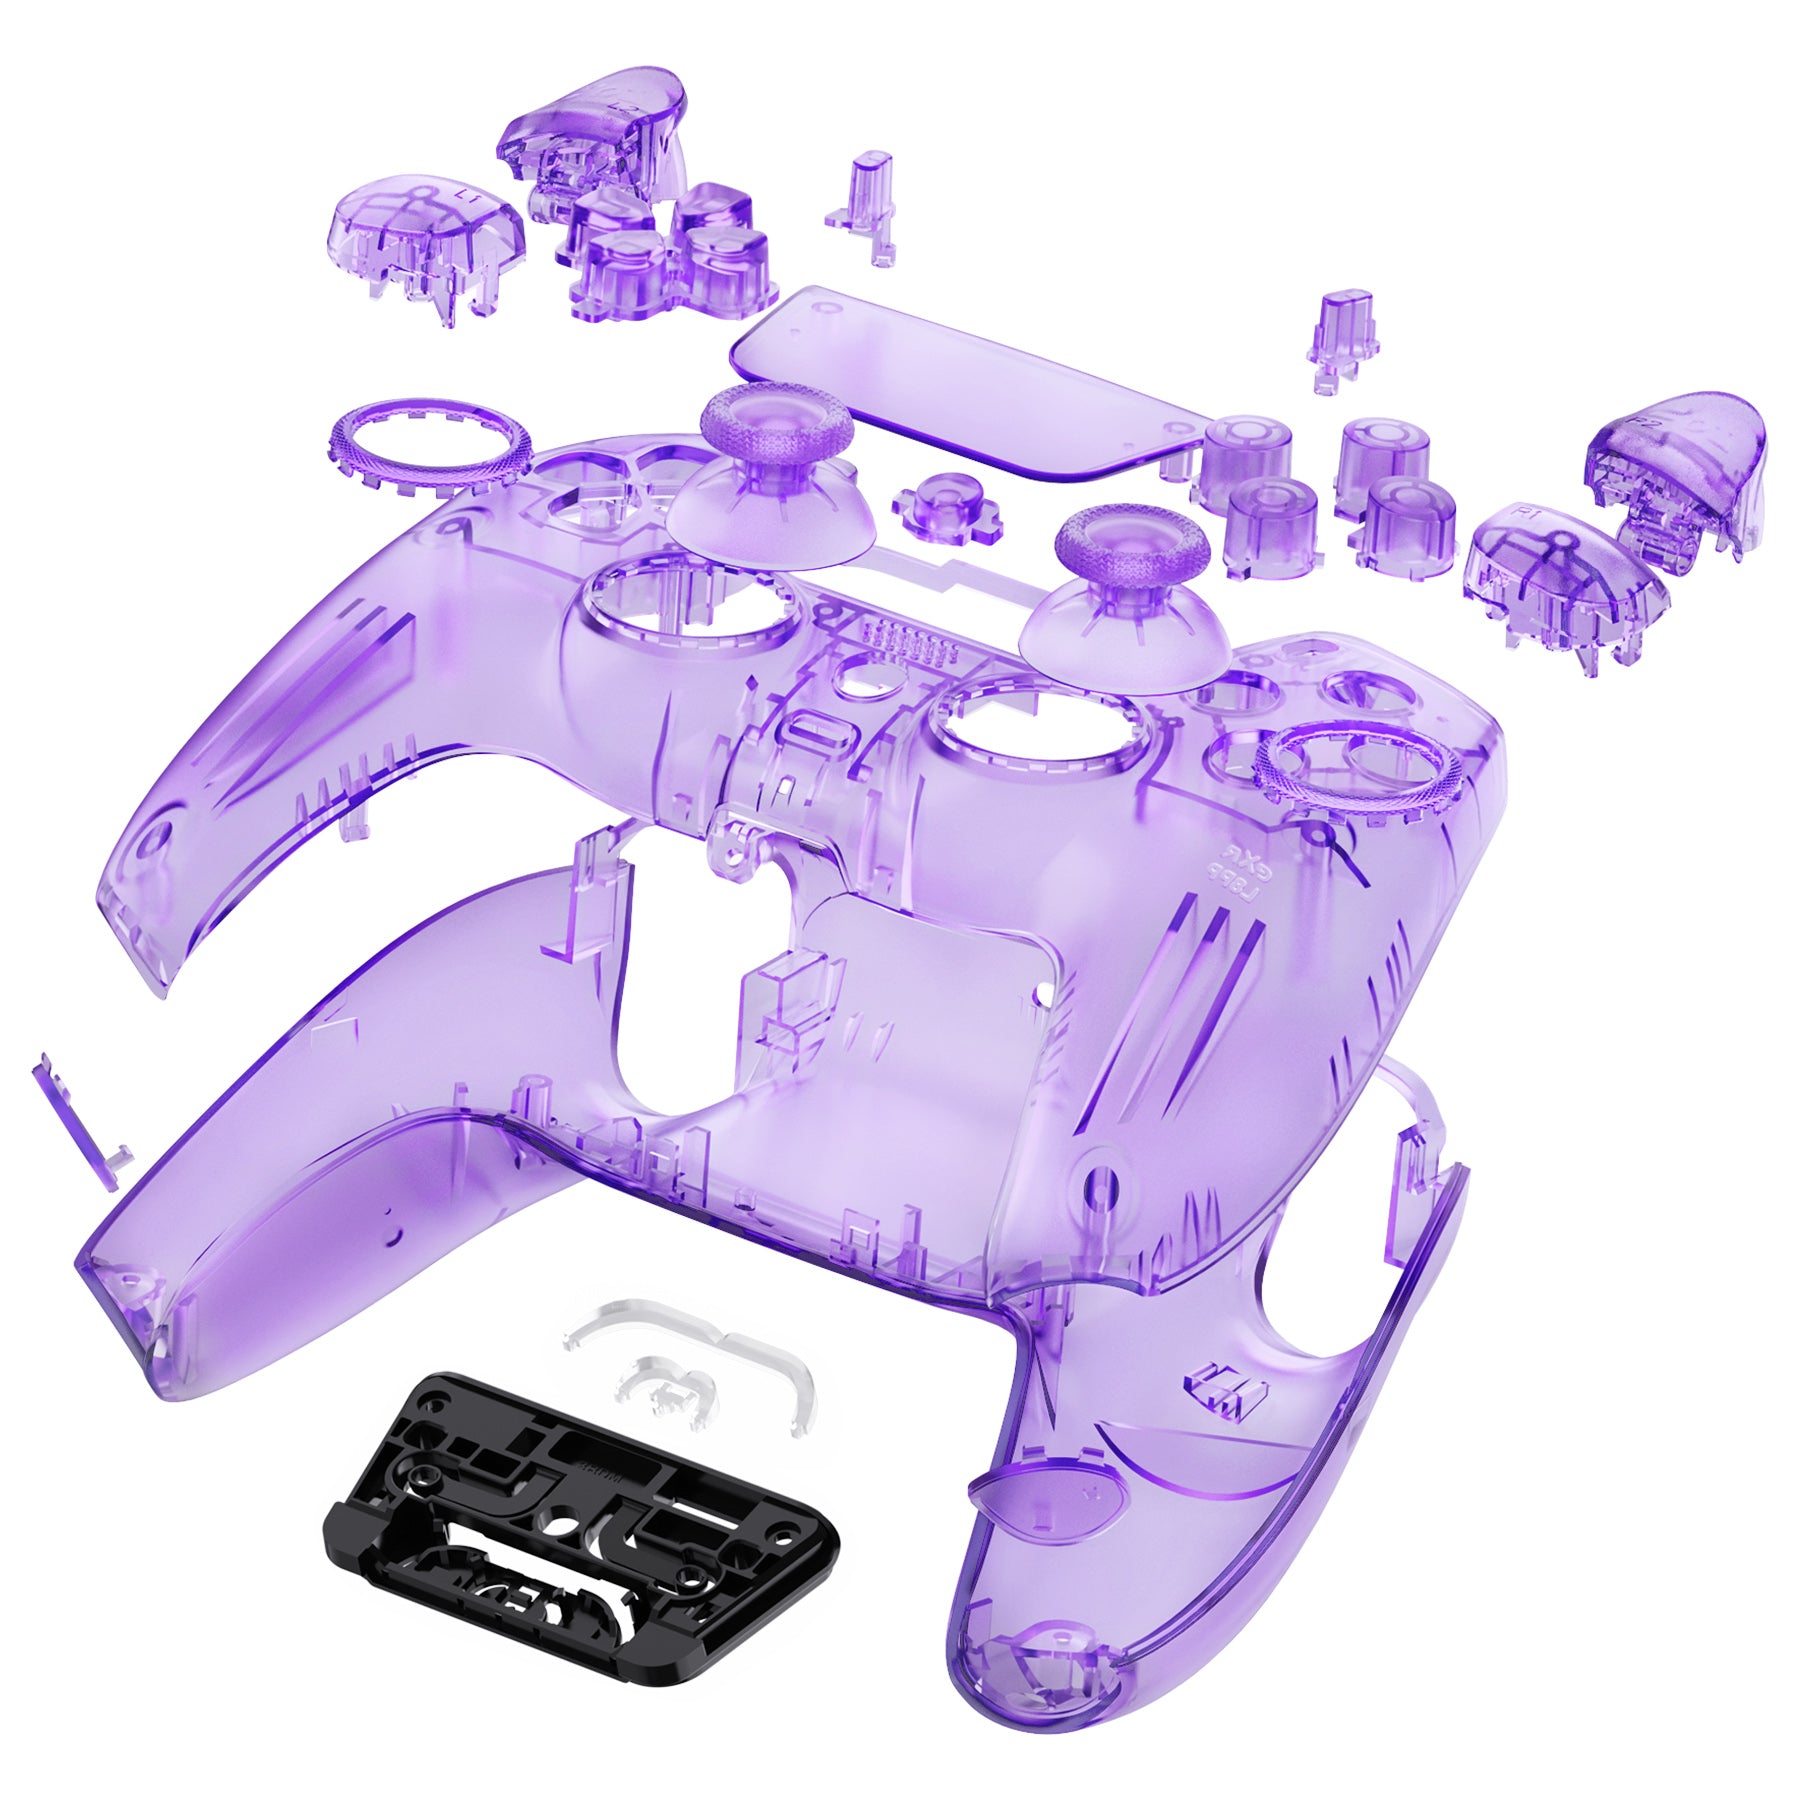 eXtremeRate LUNA Redesigned Replacement Full Set Shells with Buttons Compatible with PS5 Controller BDM-030/040 - Clear Atomic Purple eXtremeRate